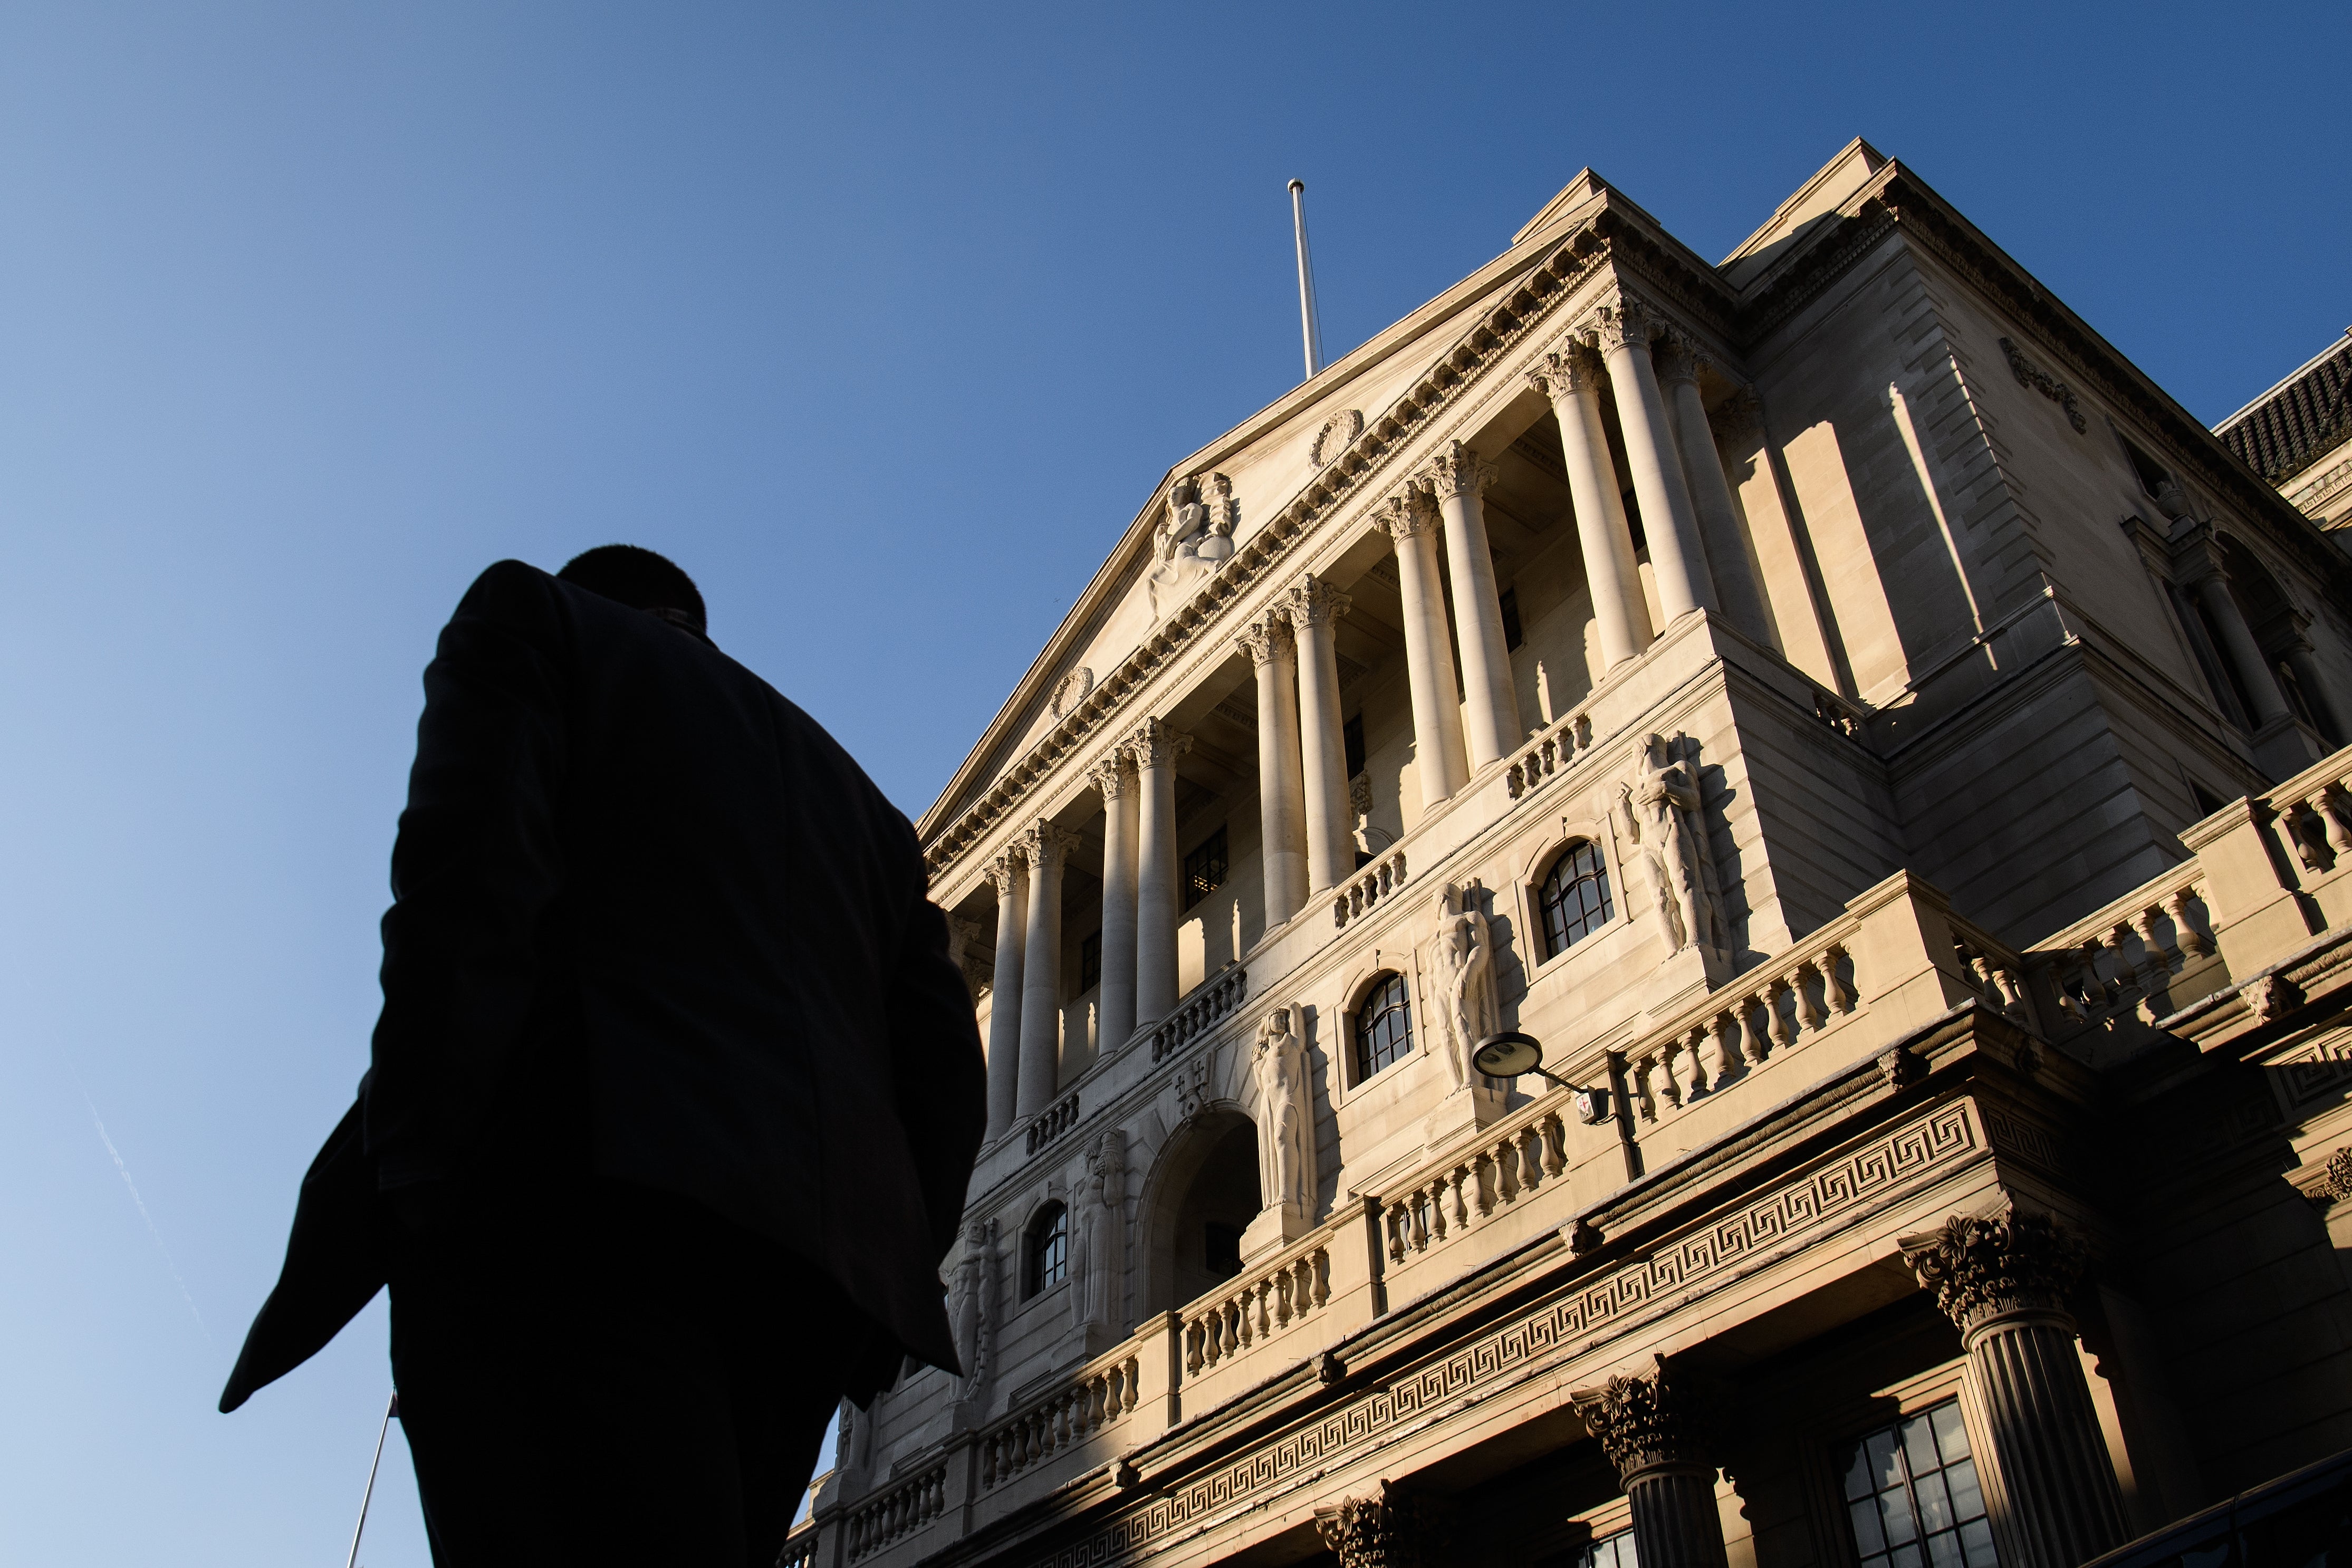 The interest rate set by the Bank of England has very little effect on the interest rates set in the ‘real’ economy